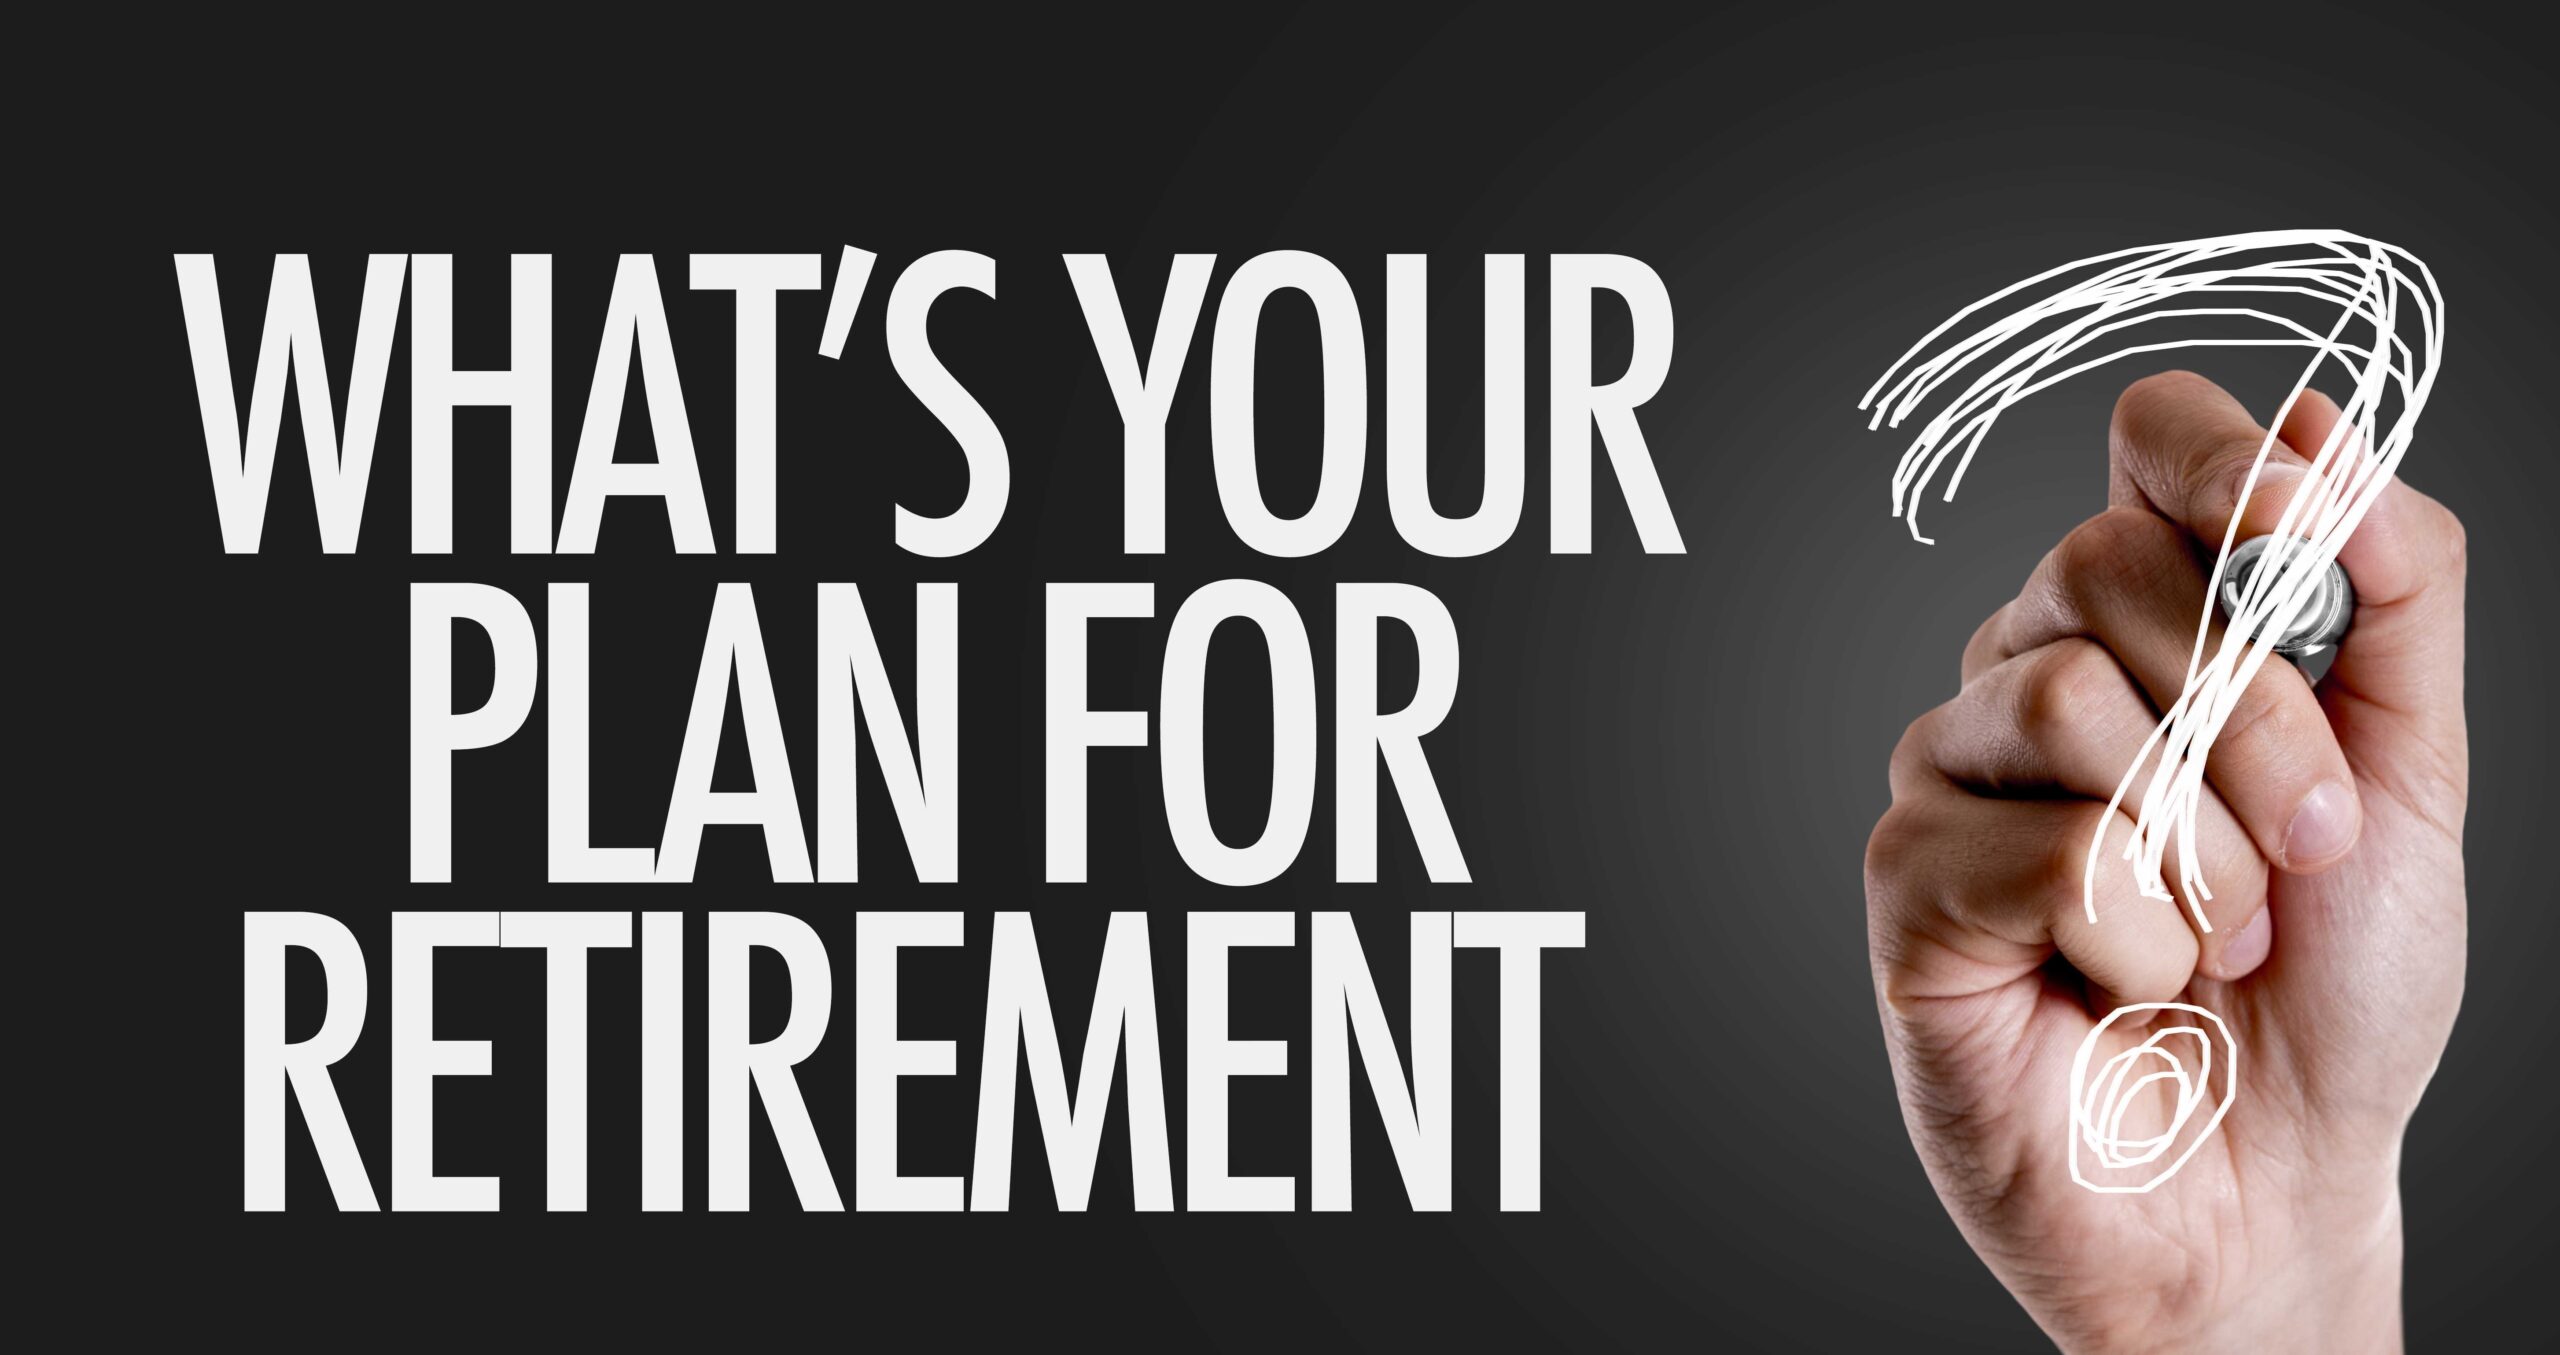 New takes on retirement planning